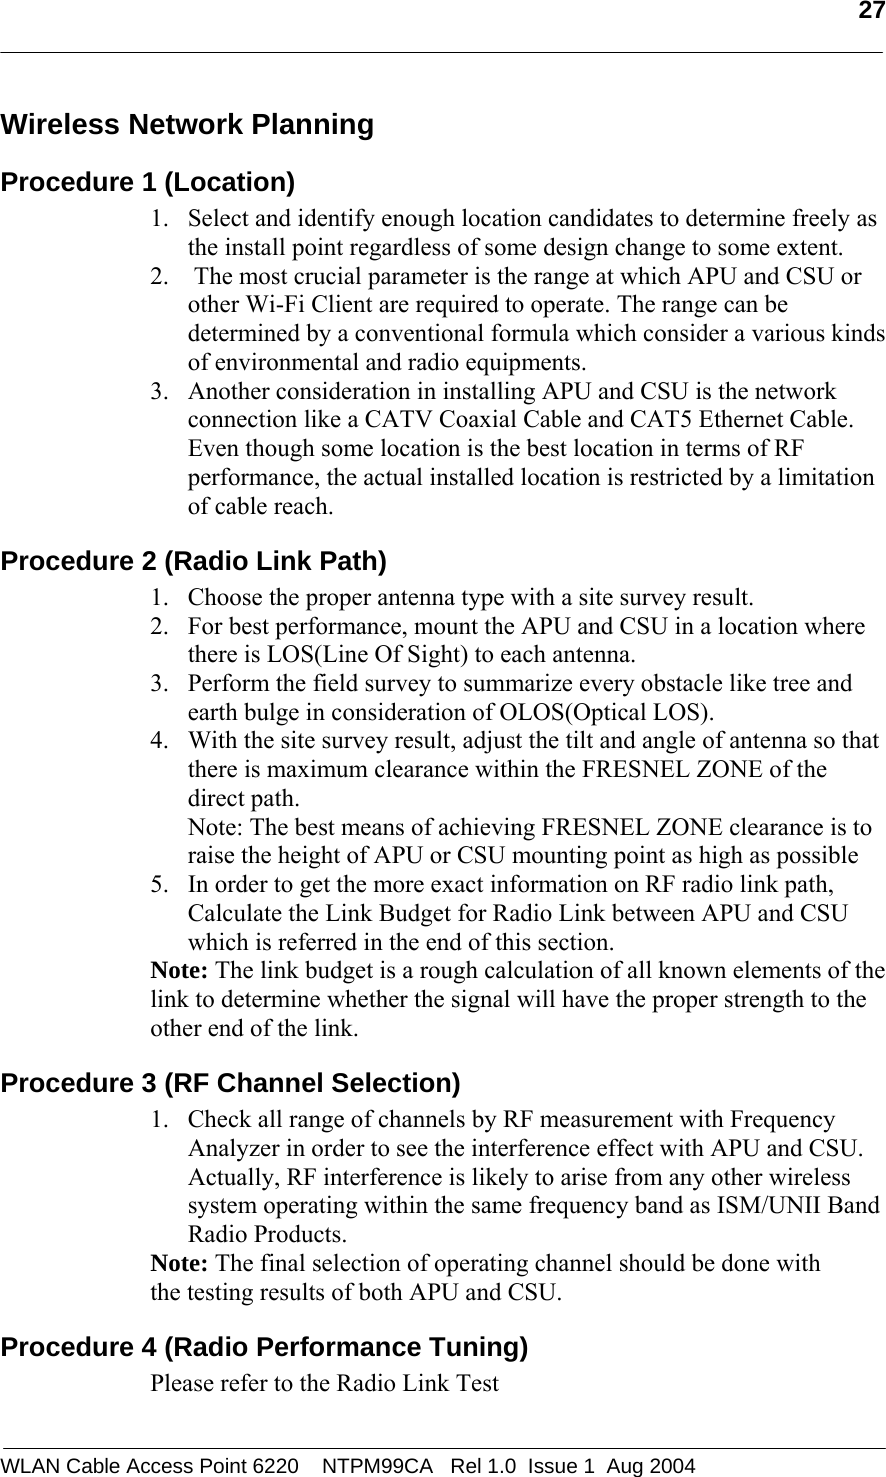   27  Wireless Network Planning  Procedure 1 (Location) 1. Select and identify enough location candidates to determine freely as the install point regardless of some design change to some extent. 2.  The most crucial parameter is the range at which APU and CSU or other Wi-Fi Client are required to operate. The range can be determined by a conventional formula which consider a various kinds of environmental and radio equipments. 3. Another consideration in installing APU and CSU is the network connection like a CATV Coaxial Cable and CAT5 Ethernet Cable.  Even though some location is the best location in terms of RF performance, the actual installed location is restricted by a limitation of cable reach. Procedure 2 (Radio Link Path) 1. Choose the proper antenna type with a site survey result. 2. For best performance, mount the APU and CSU in a location where there is LOS(Line Of Sight) to each antenna.  3. Perform the field survey to summarize every obstacle like tree and earth bulge in consideration of OLOS(Optical LOS).  4. With the site survey result, adjust the tilt and angle of antenna so that there is maximum clearance within the FRESNEL ZONE of the direct path.  Note: The best means of achieving FRESNEL ZONE clearance is to raise the height of APU or CSU mounting point as high as possible 5. In order to get the more exact information on RF radio link path, Calculate the Link Budget for Radio Link between APU and CSU which is referred in the end of this section. Note: The link budget is a rough calculation of all known elements of the link to determine whether the signal will have the proper strength to the other end of the link.  Procedure 3 (RF Channel Selection) 1. Check all range of channels by RF measurement with Frequency Analyzer in order to see the interference effect with APU and CSU. Actually, RF interference is likely to arise from any other wireless system operating within the same frequency band as ISM/UNII Band Radio Products.  Note: The final selection of operating channel should be done with the testing results of both APU and CSU. Procedure 4 (Radio Performance Tuning) Please refer to the Radio Link Test WLAN Cable Access Point 6220    NTPM99CA   Rel 1.0  Issue 1  Aug 2004 